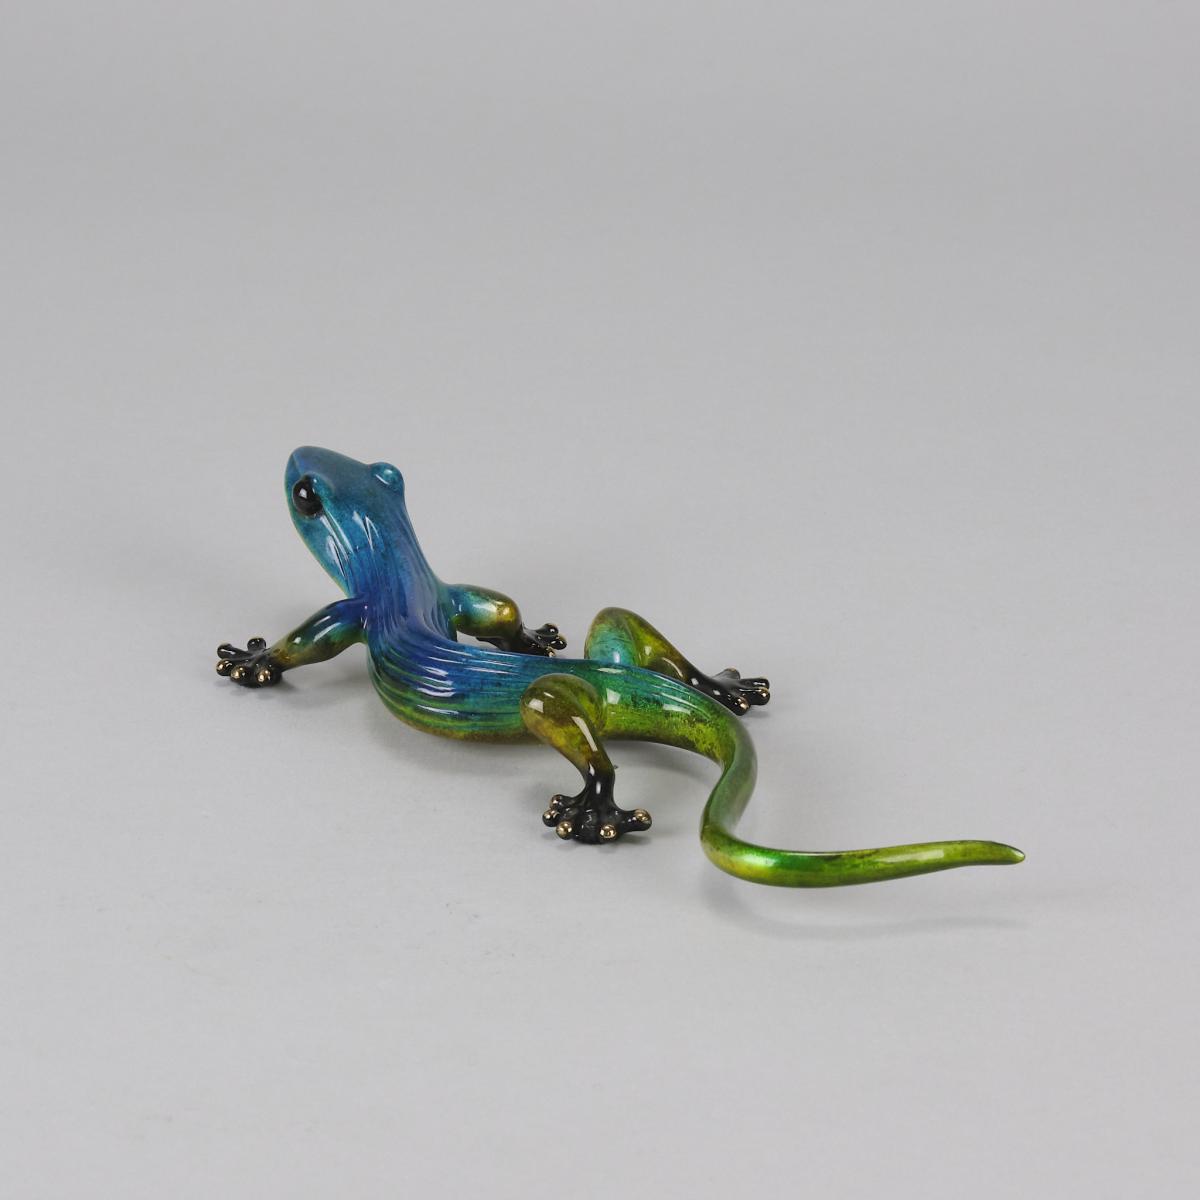 Limited Edition Bronze Sculpture entitled "Margarita Gecko" by Tim Cotterill